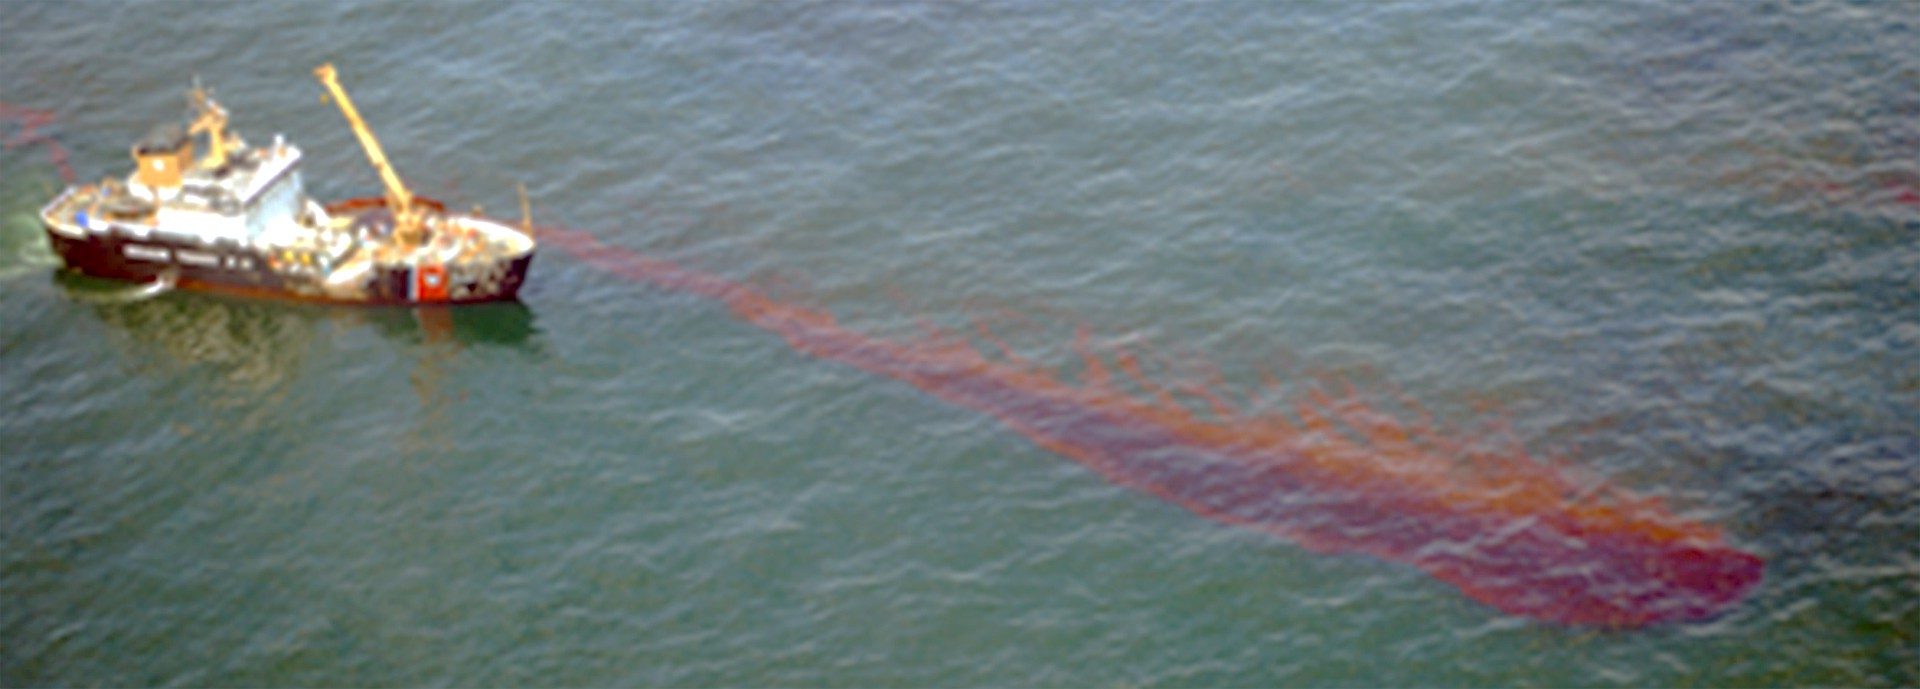 aerial view of boat by oil slick in water